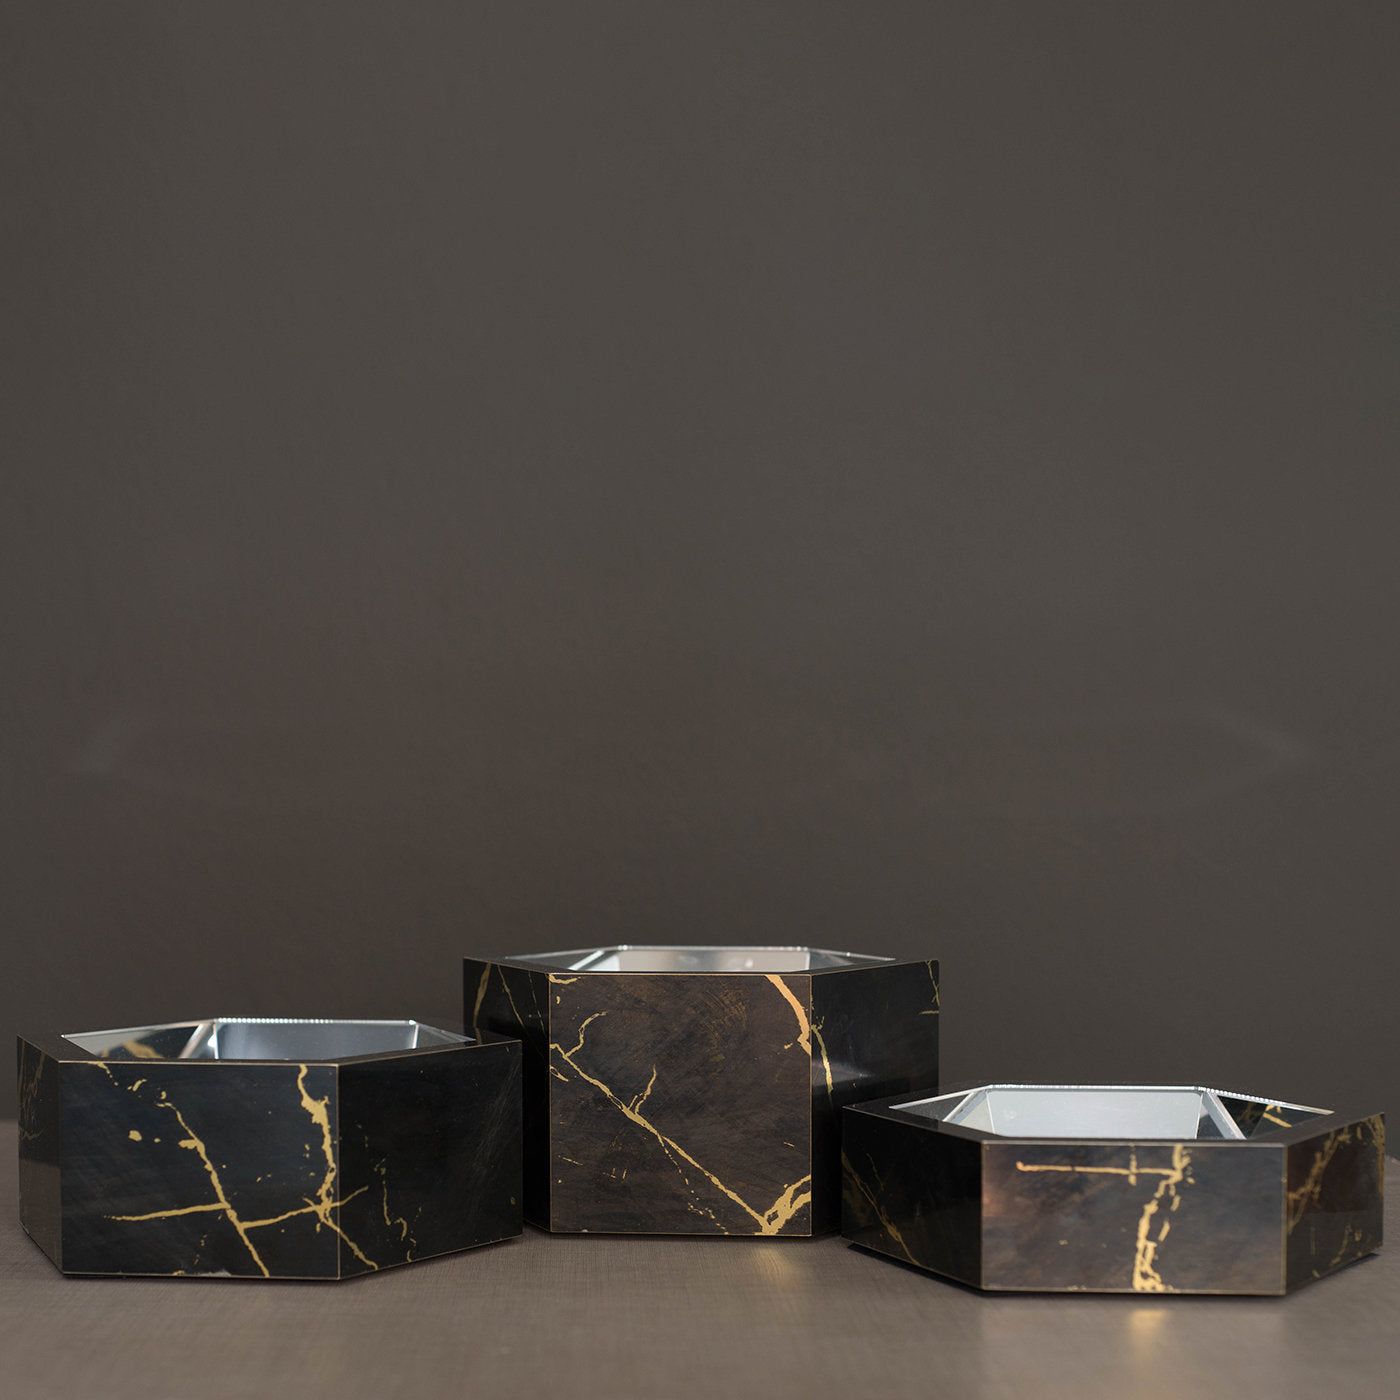 Esa Black Marbled Stackable Catchall Box - Alternative view 2